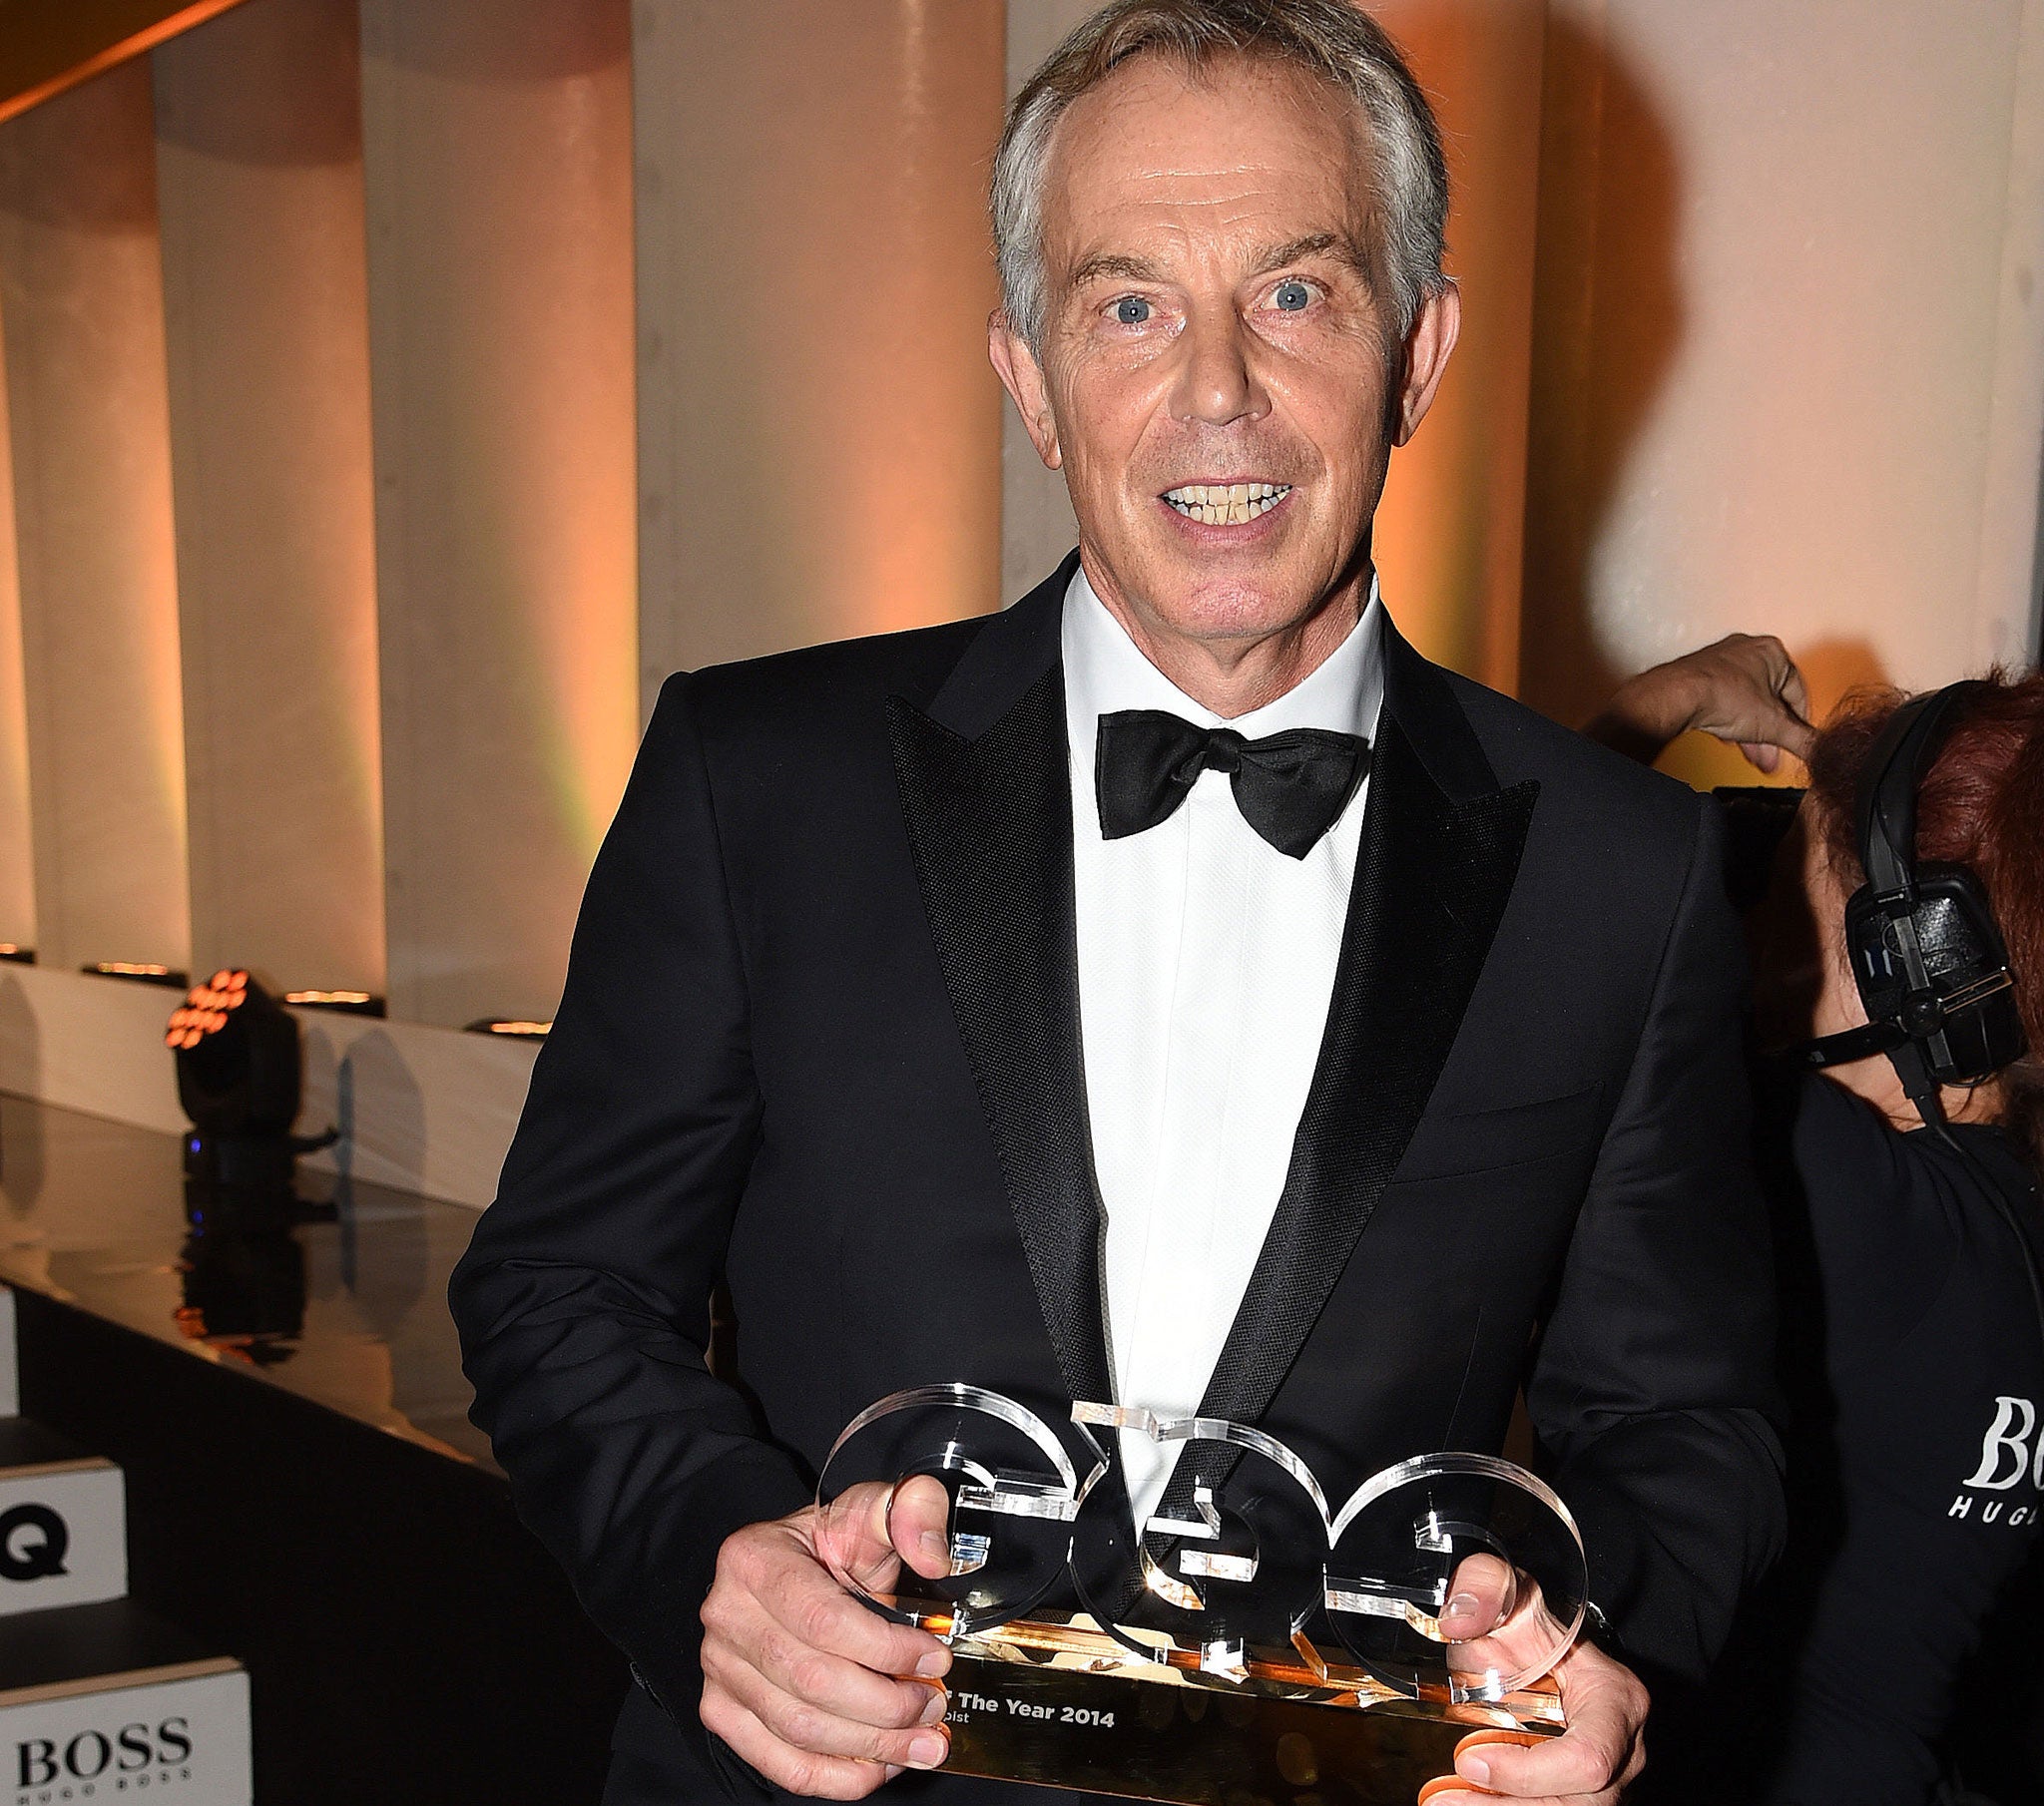 Tony Blair Philanthropist of the Year award defended by GQ The Independent The Independent